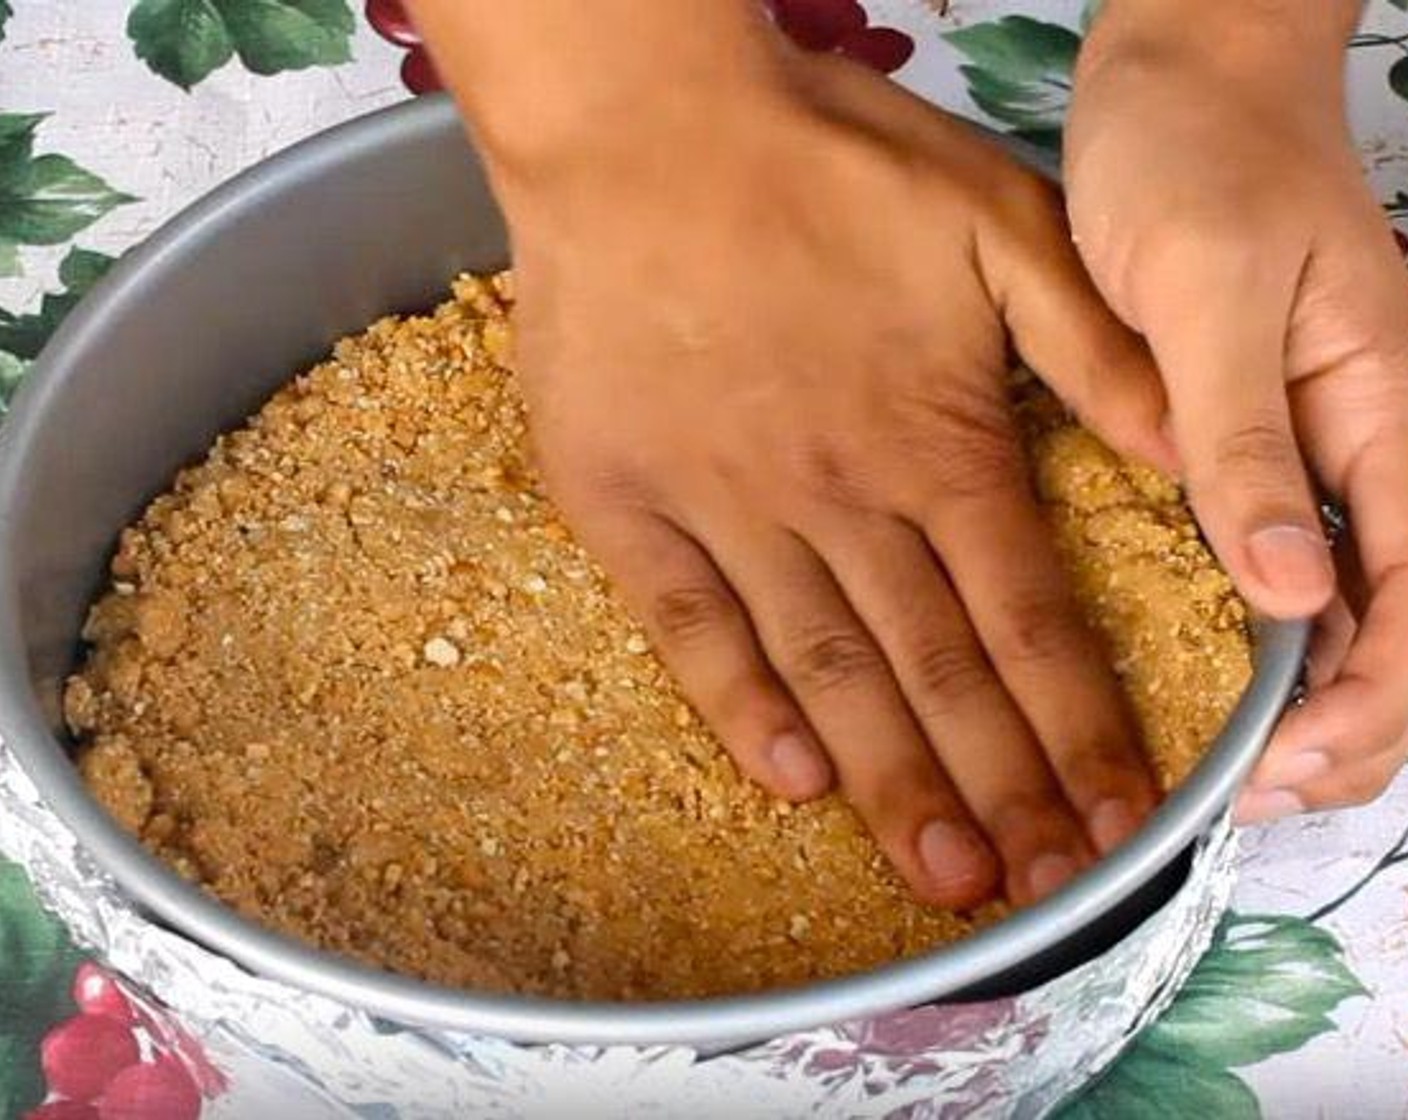 step 2 In a Ziploc bag, add Graham Cracker Crumbs (2 cups), Granulated Sugar (1/4 cup) and Butter (1/2 cup). Shake together until mixture resembles wet sand. Transfer to a springform pan lined with aluminum foil and press down into the bottom of the dish. Store in fridge until ready to use.